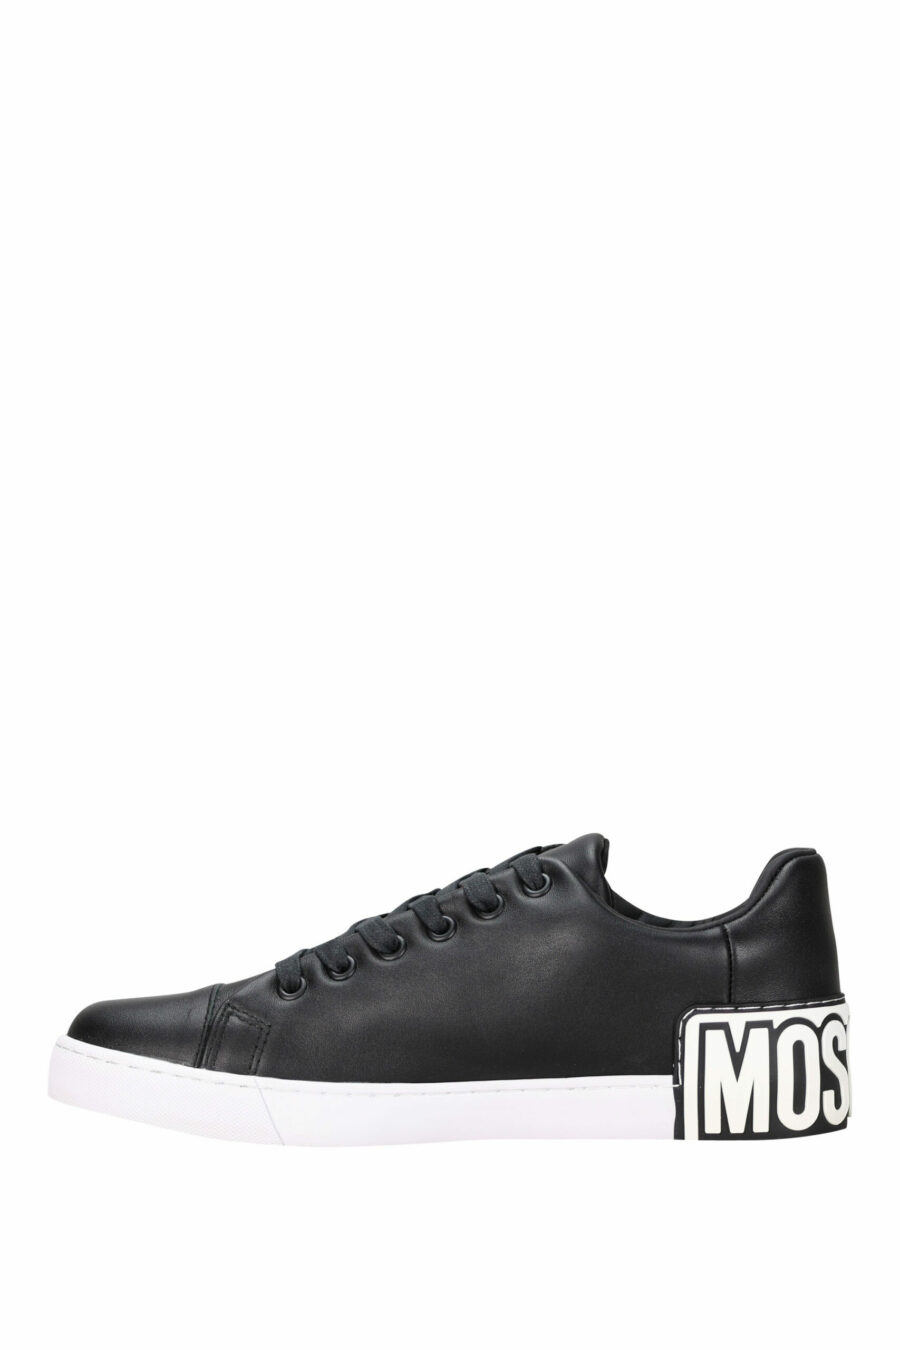 Black trainers "vulc25" with white sole and rubber logo on the back - 8054388585958 2 scaled